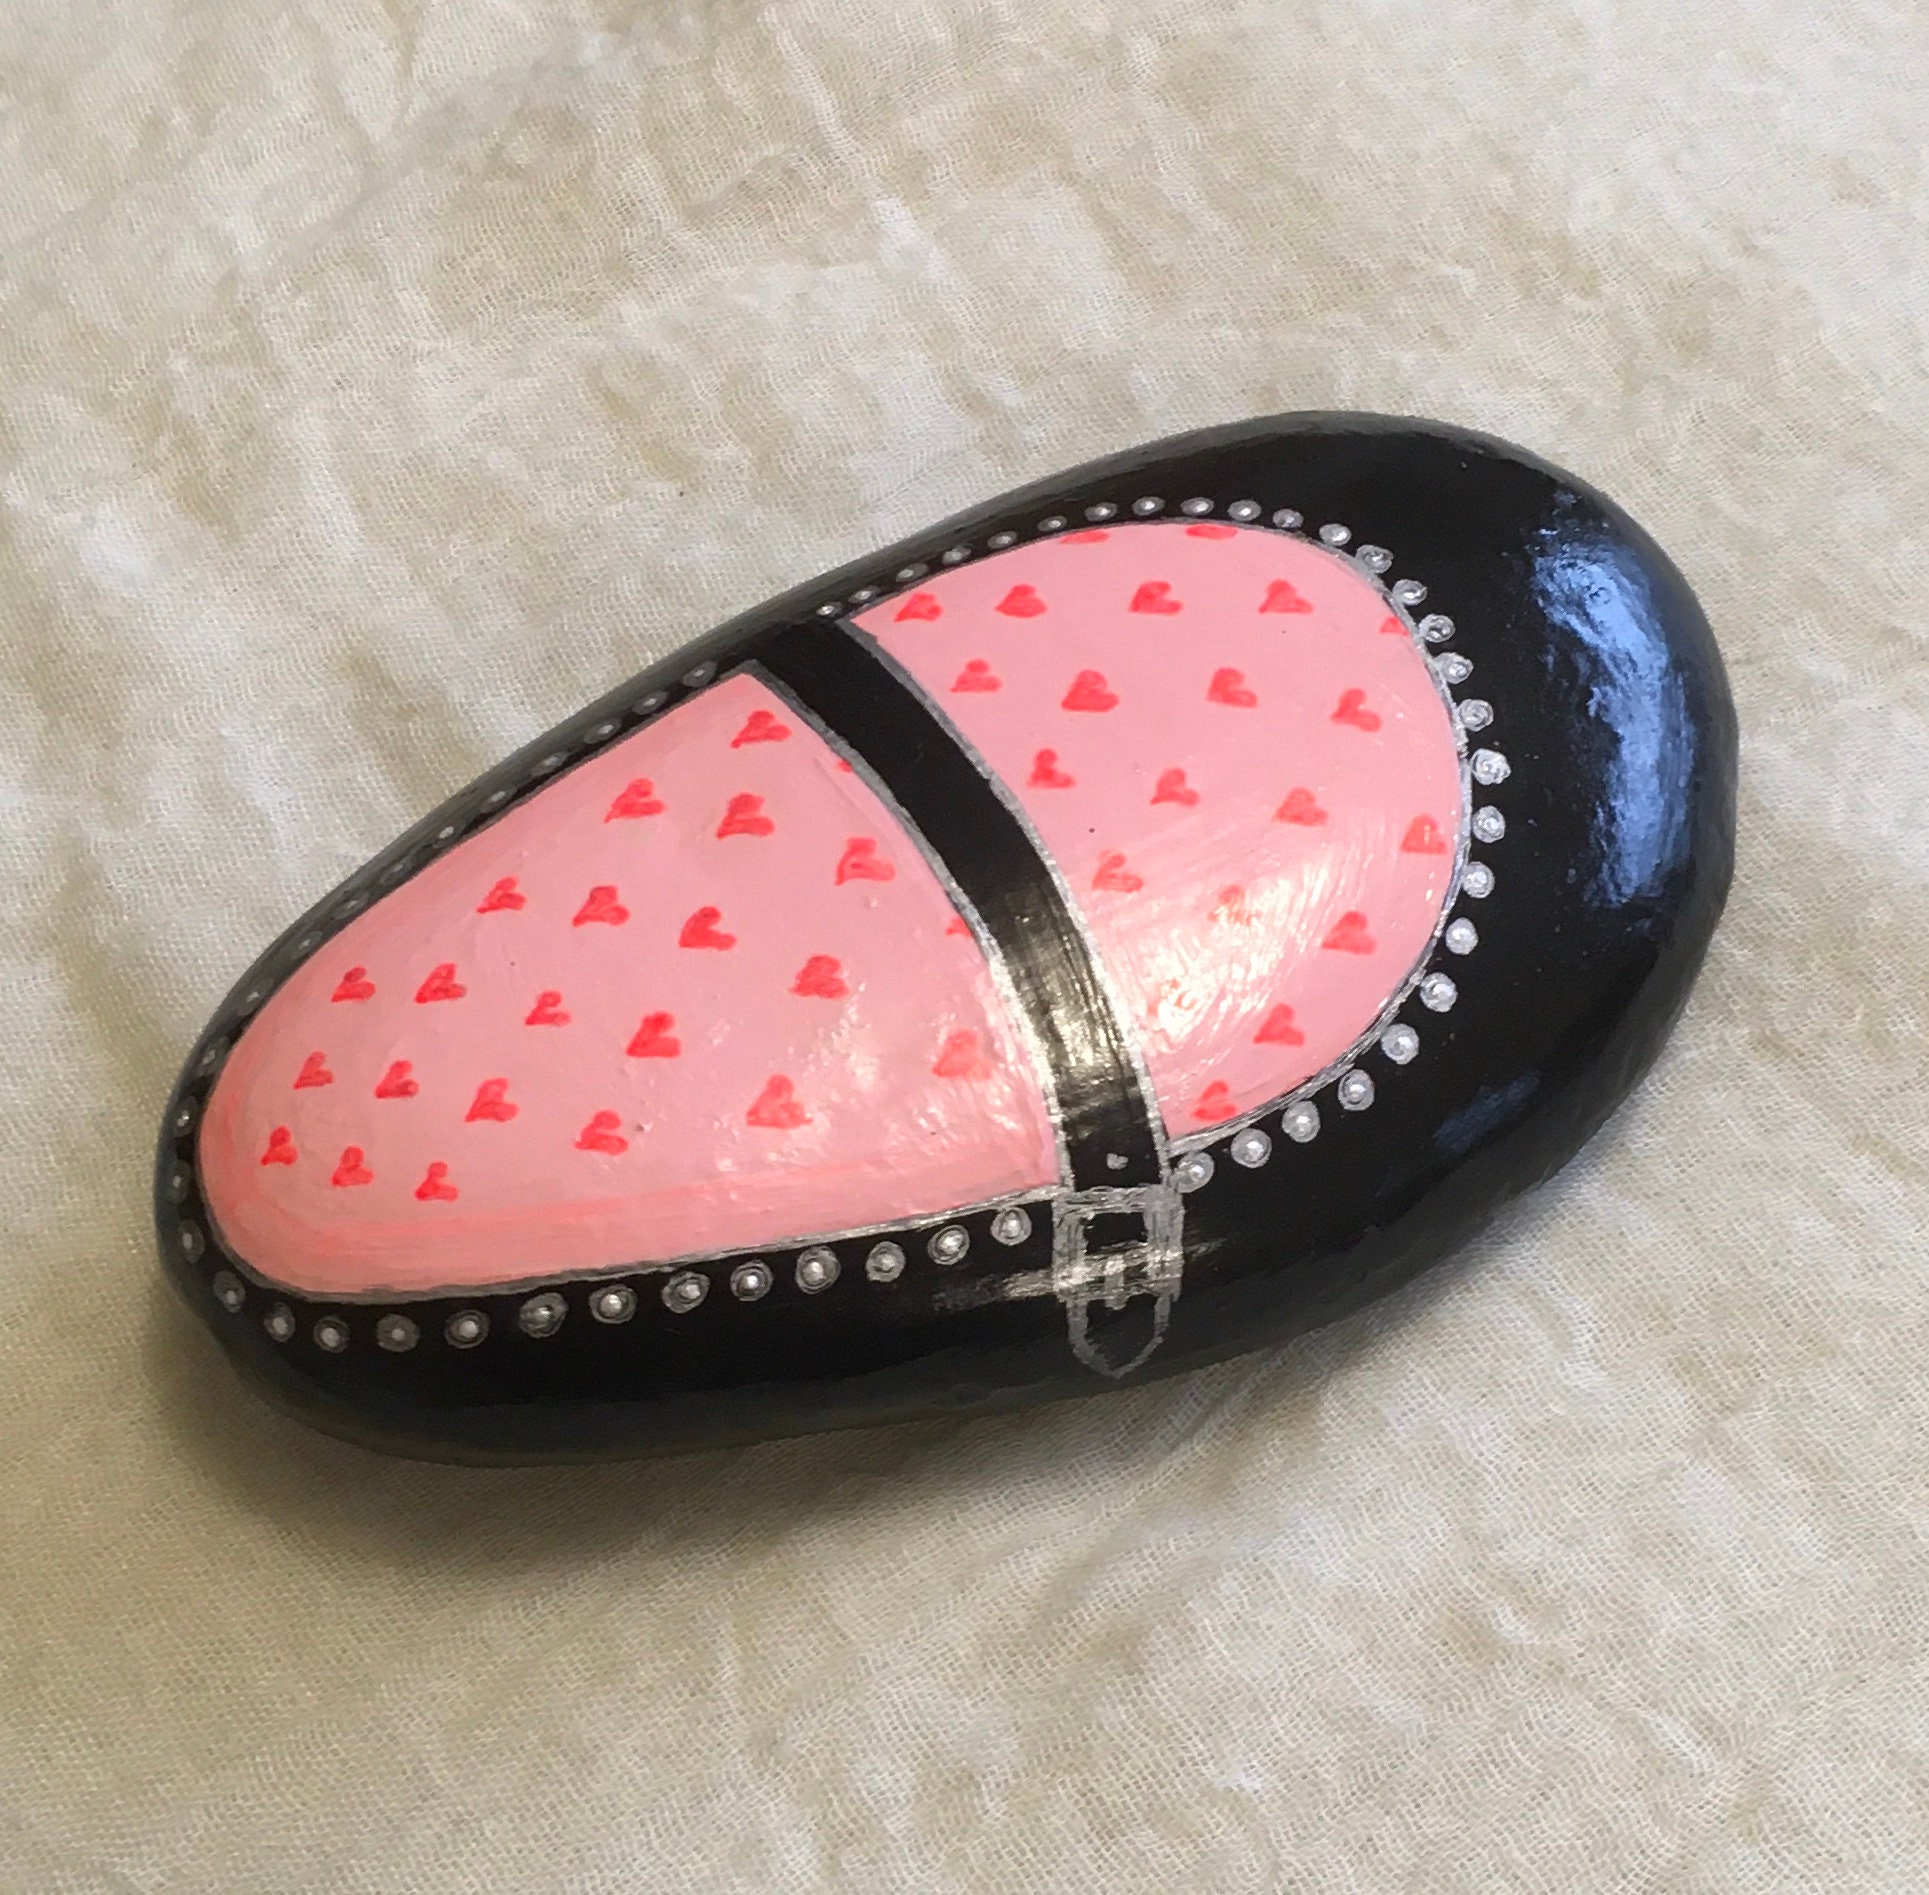 Red Sneaker Shoe Painted on A Small Stone is Painted With 